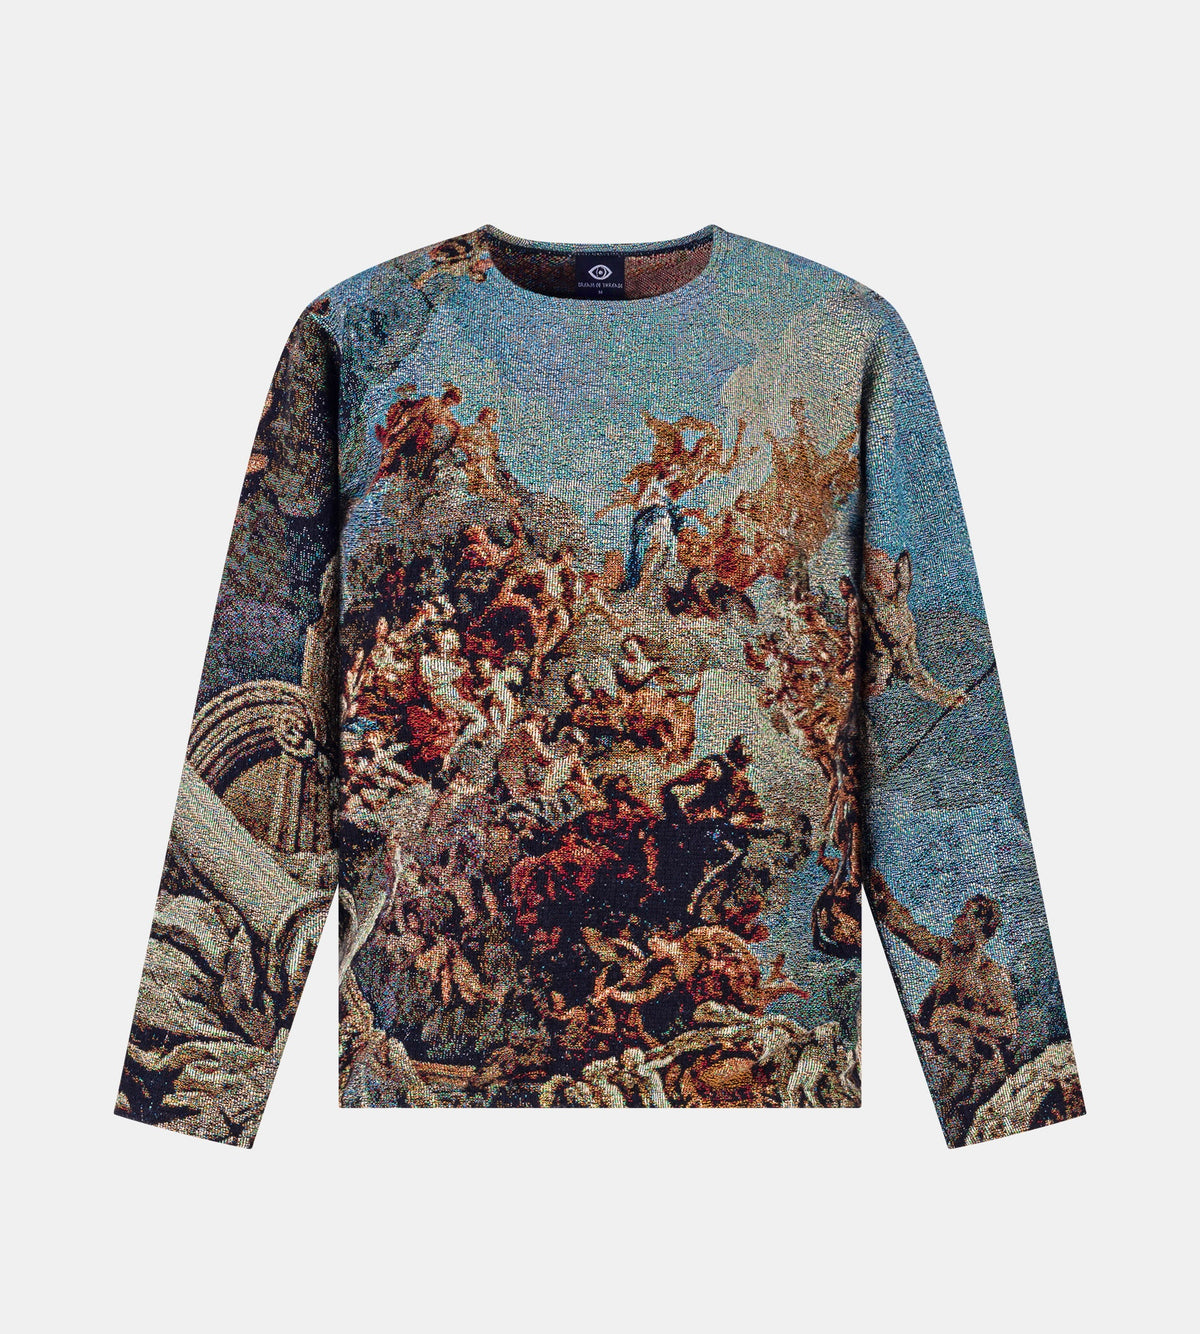 PALACE OF VERSAILLES SWEATER